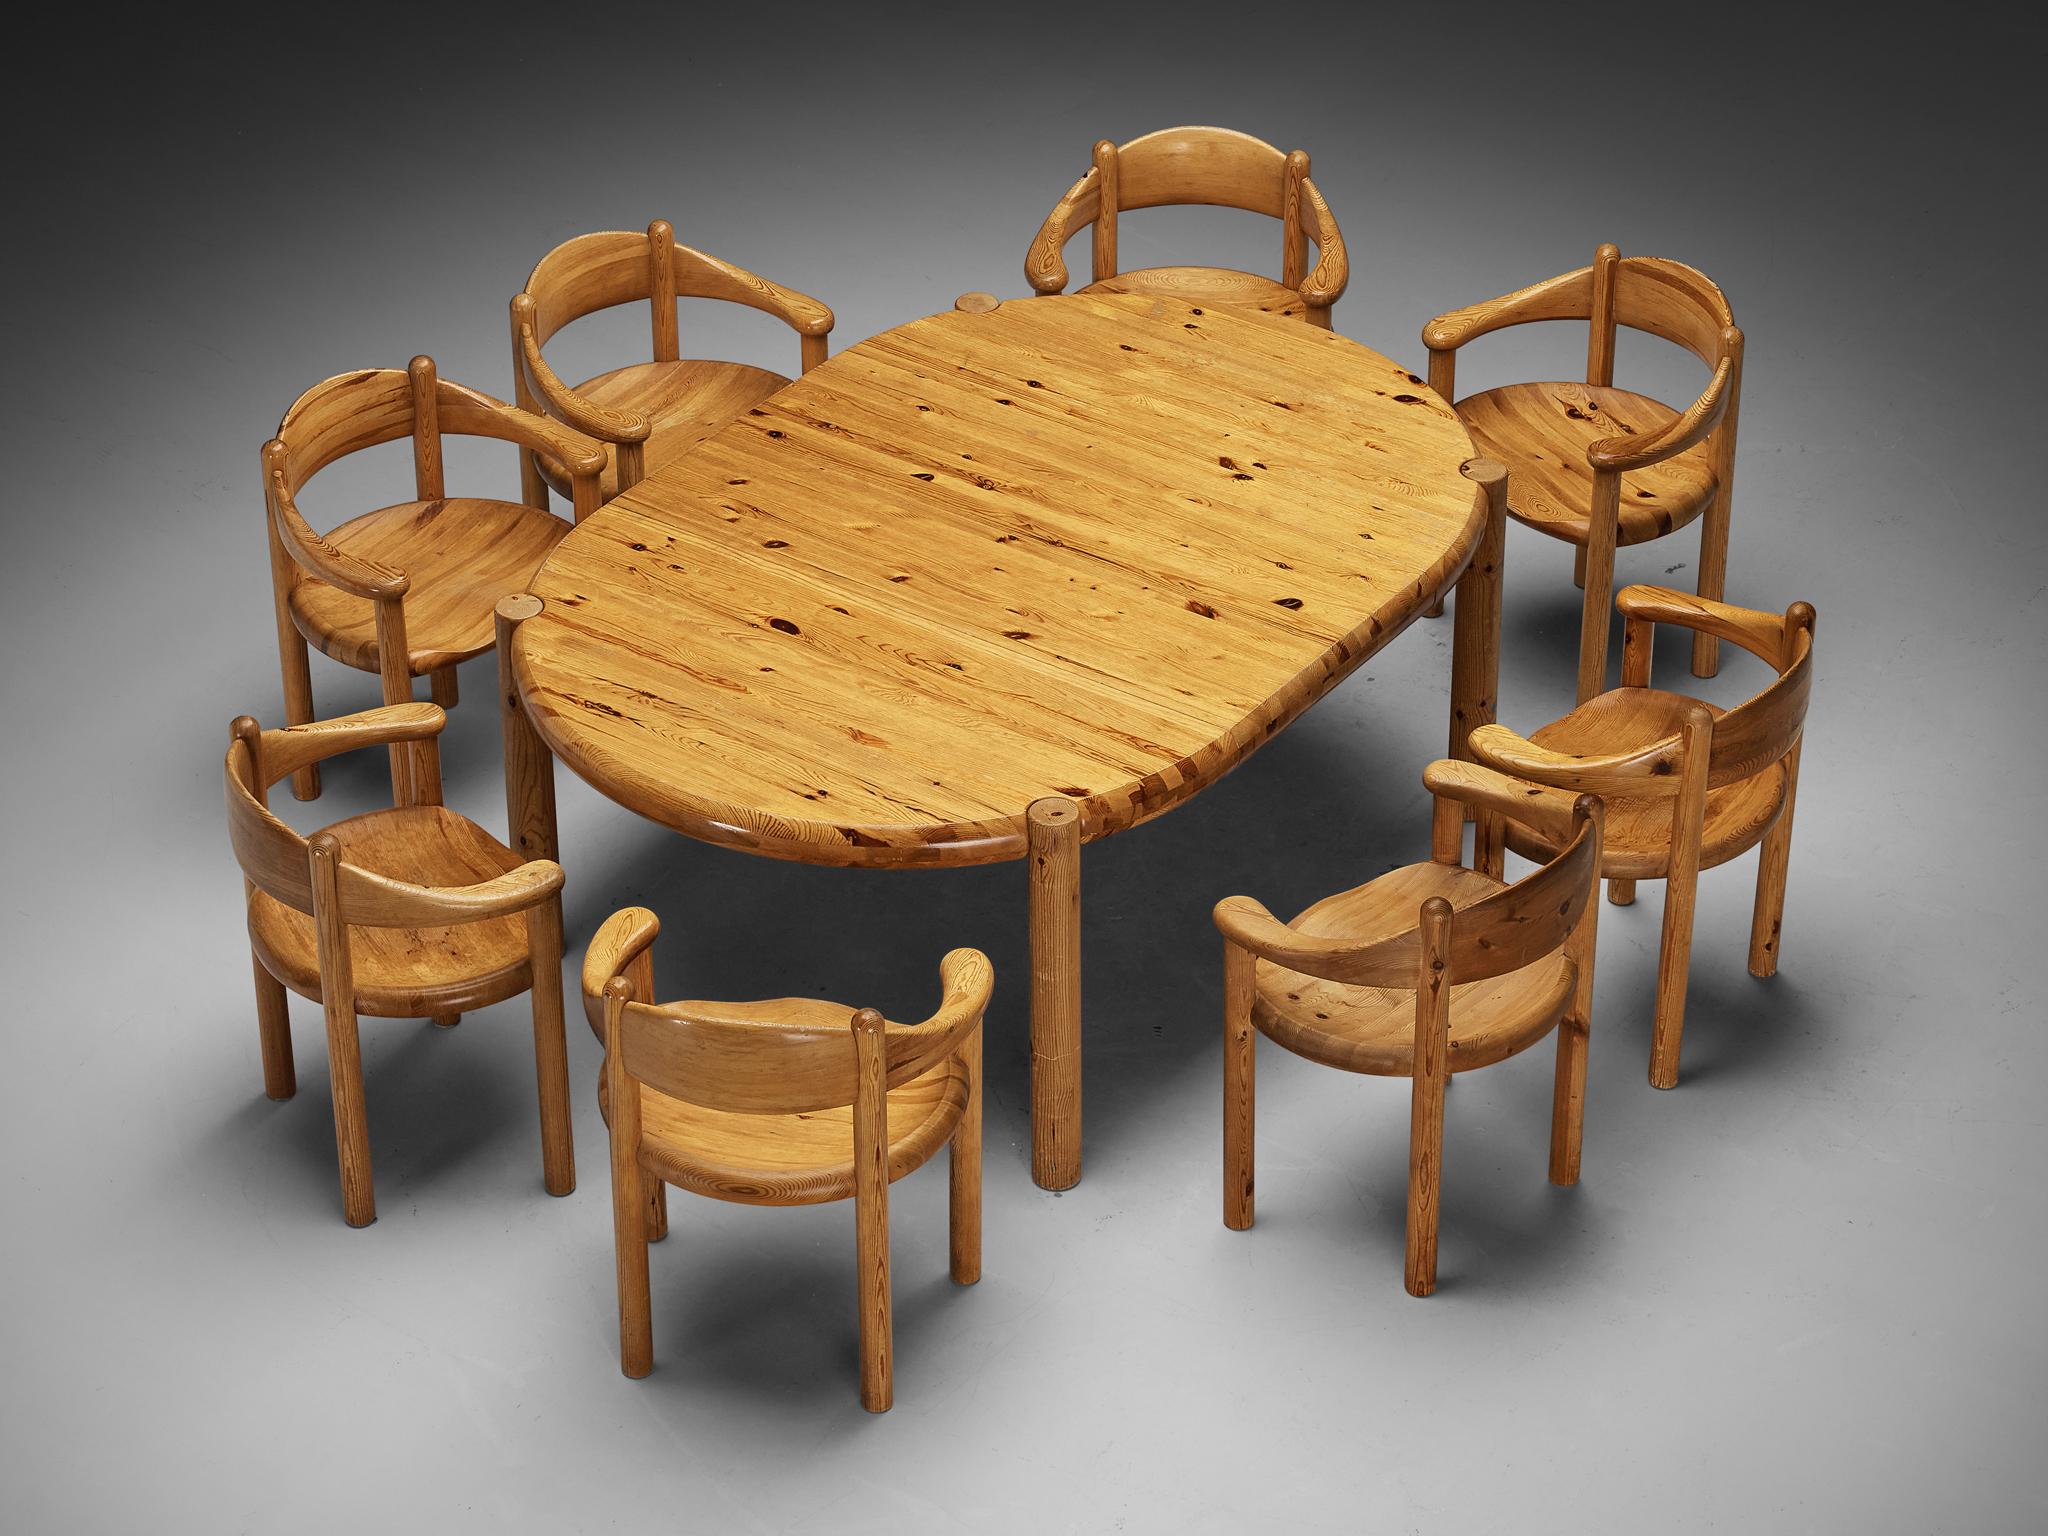 Rainer Daumiller, set of dining table with eight armchairs, pine, Denmark, 1970s.

This dining room set contains an extendable dining table and eight dining chairs, designed by Rainer Daumiller. The table can be configured into two versions by means